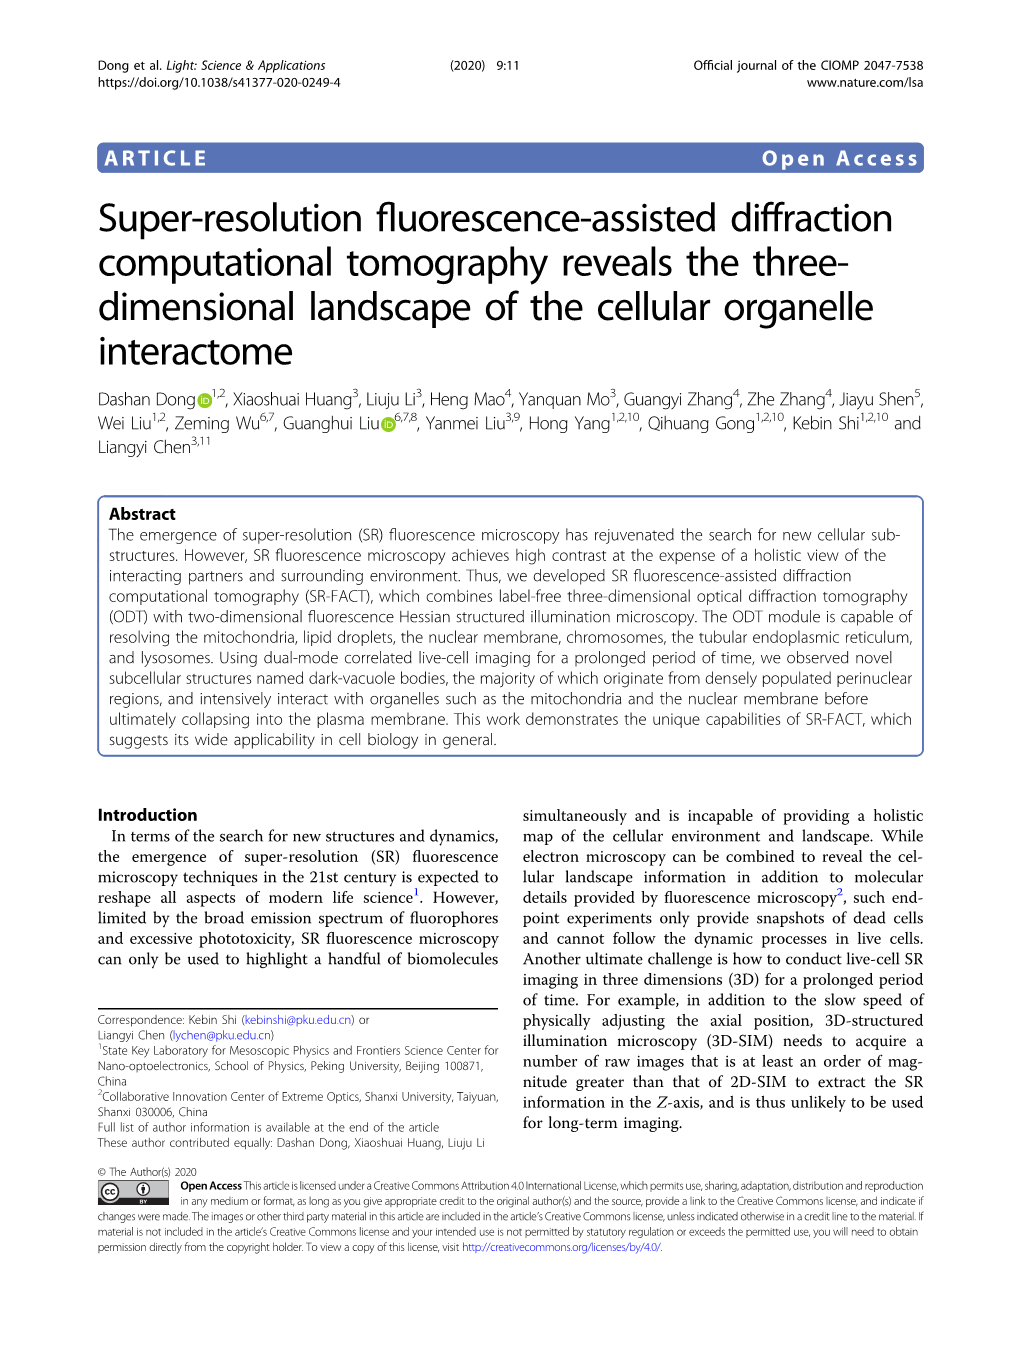 Super-Resolution Fluorescence-Assisted Diffraction